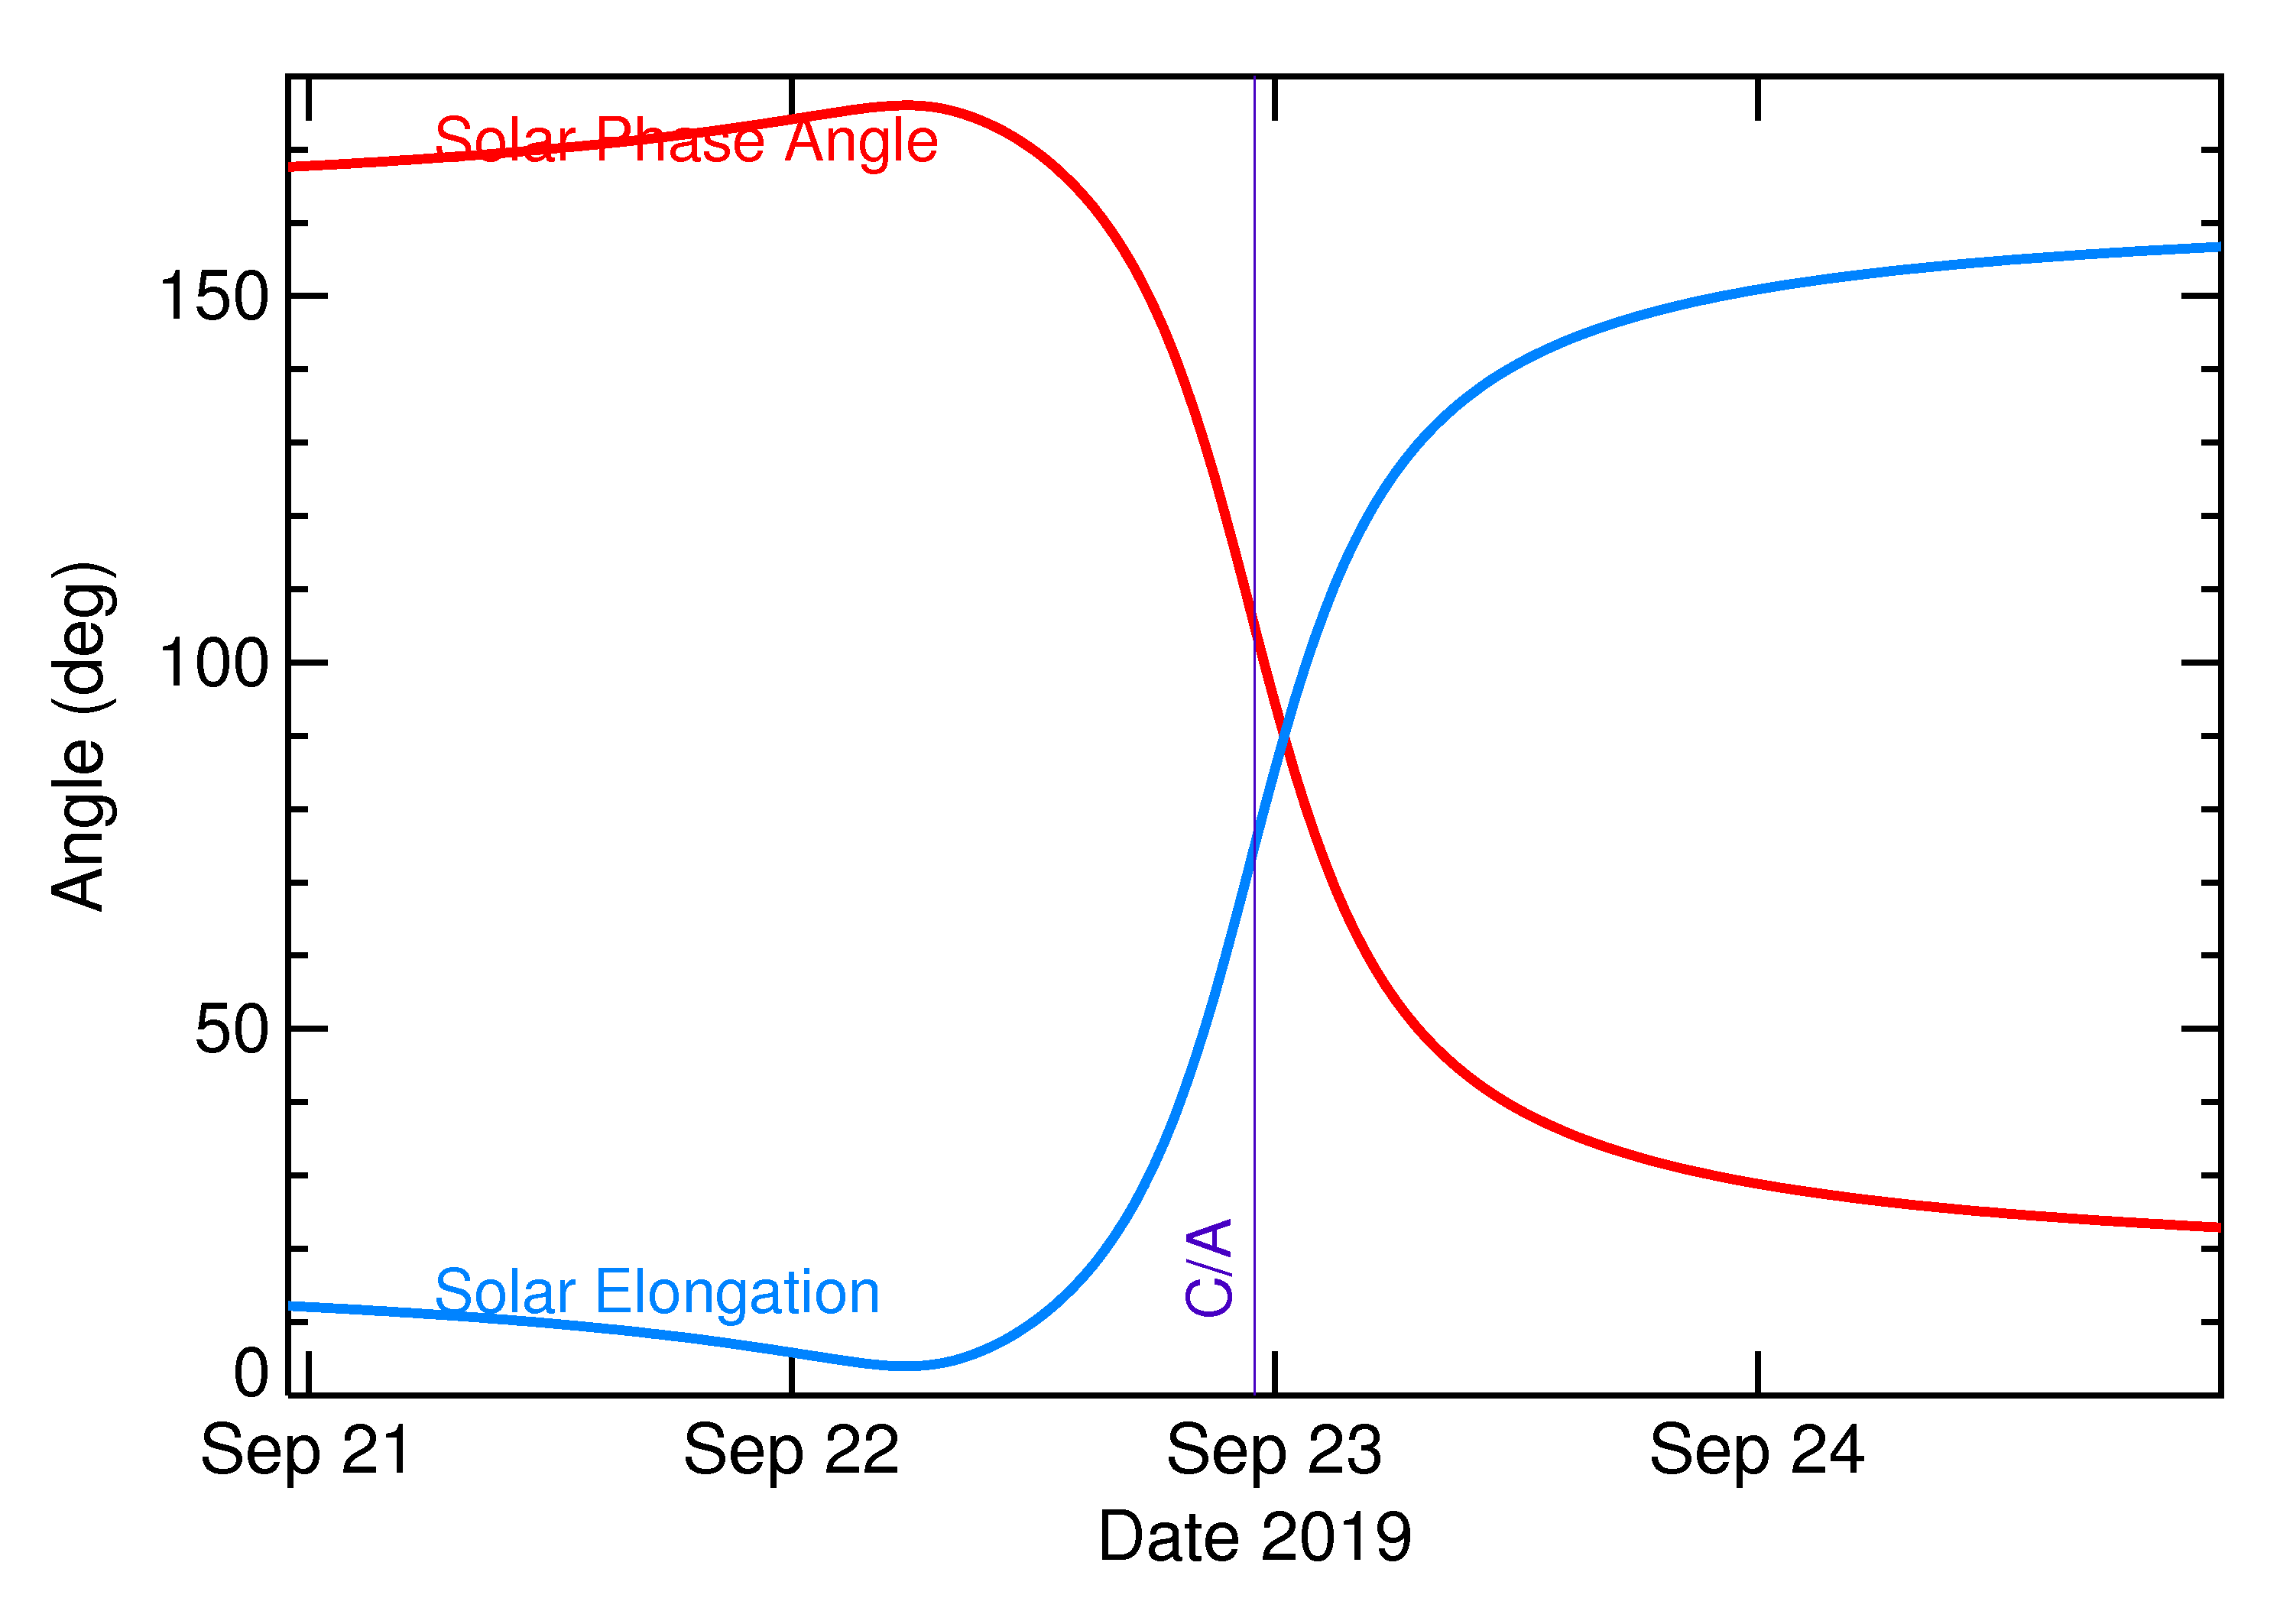 Solar Elongation and Solar Phase Angle of 2019 SS3 in the days around closest approach